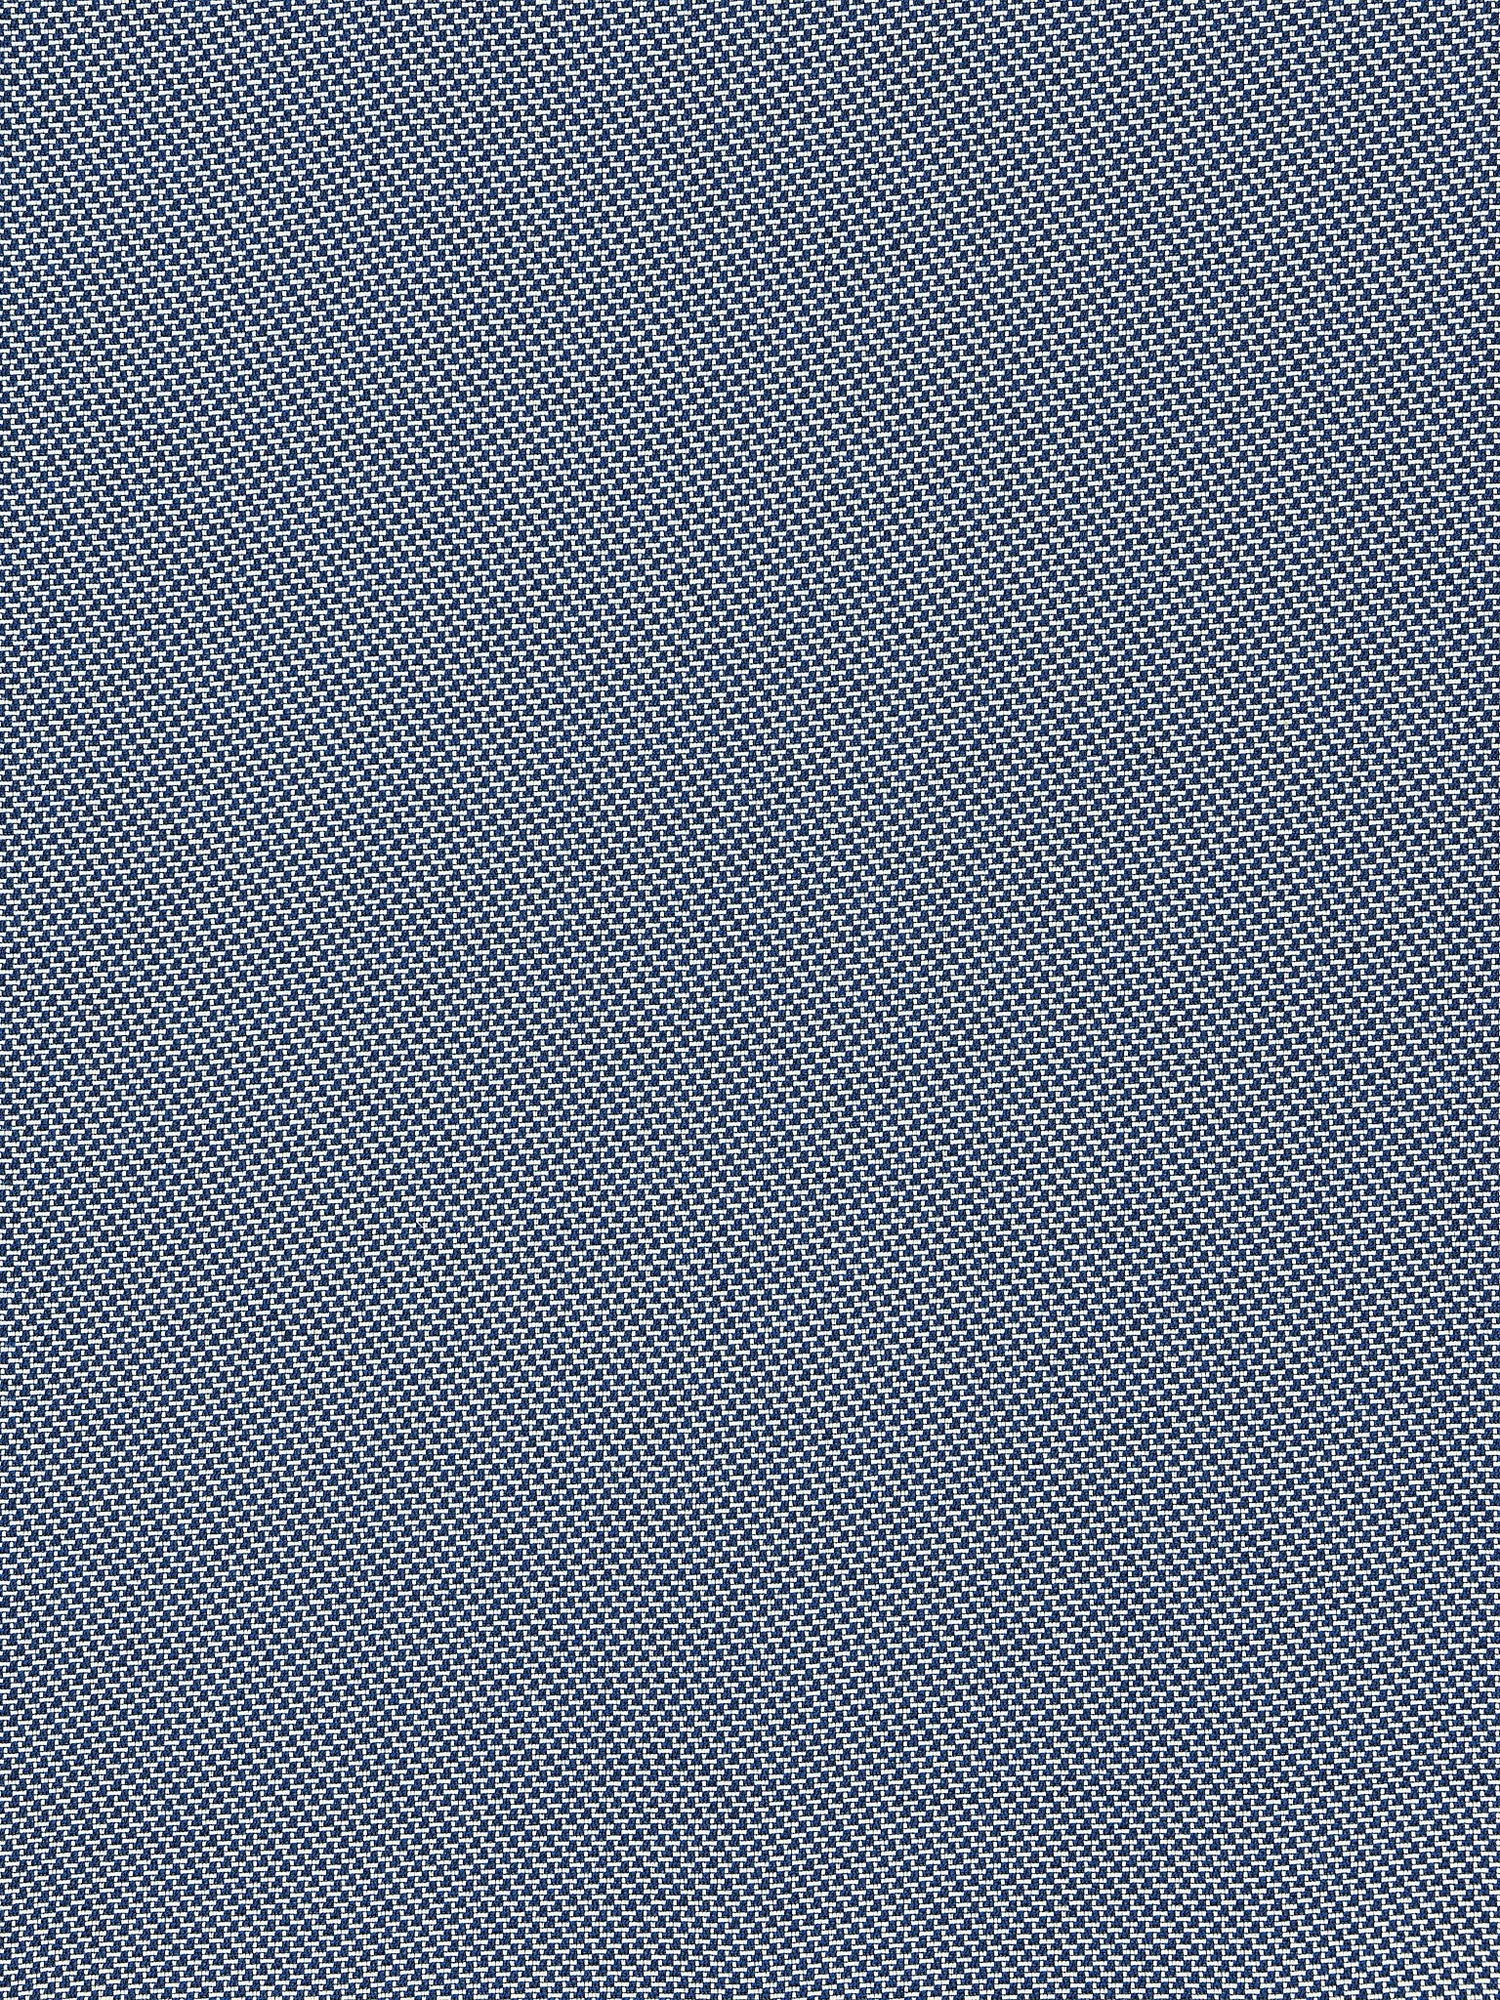 North Downs fabric in cobalt color - pattern number EY 000113ND - by Scalamandre in the Old World Weavers collection